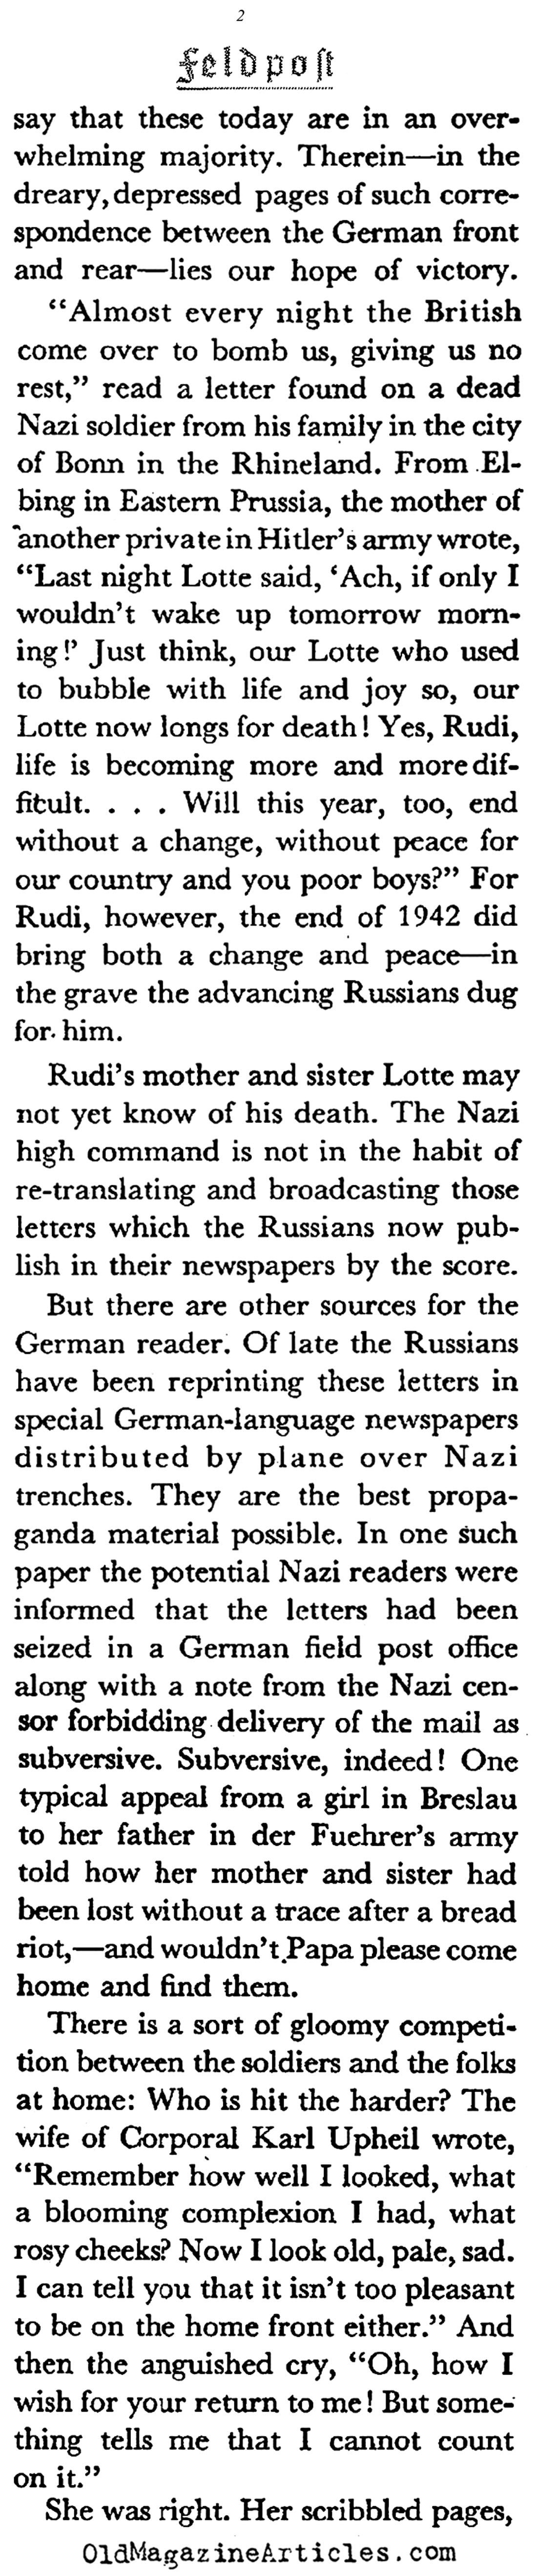 Letters from the German Home Front (Coronet Magazine, 1943)